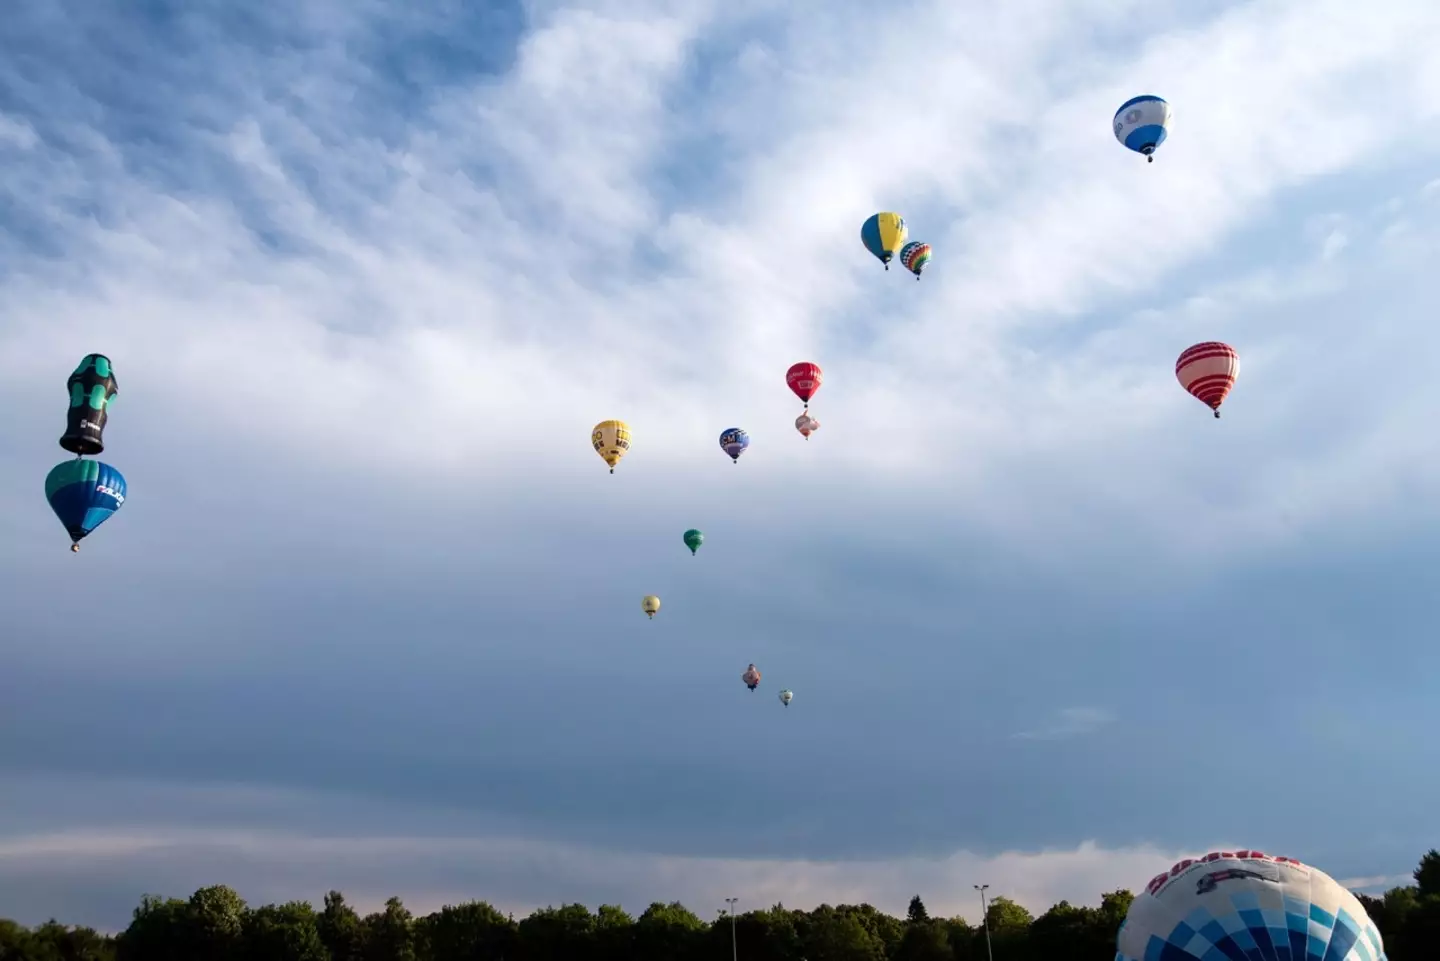 A man has died after a hot air balloon 'fell to the ground', police have said.